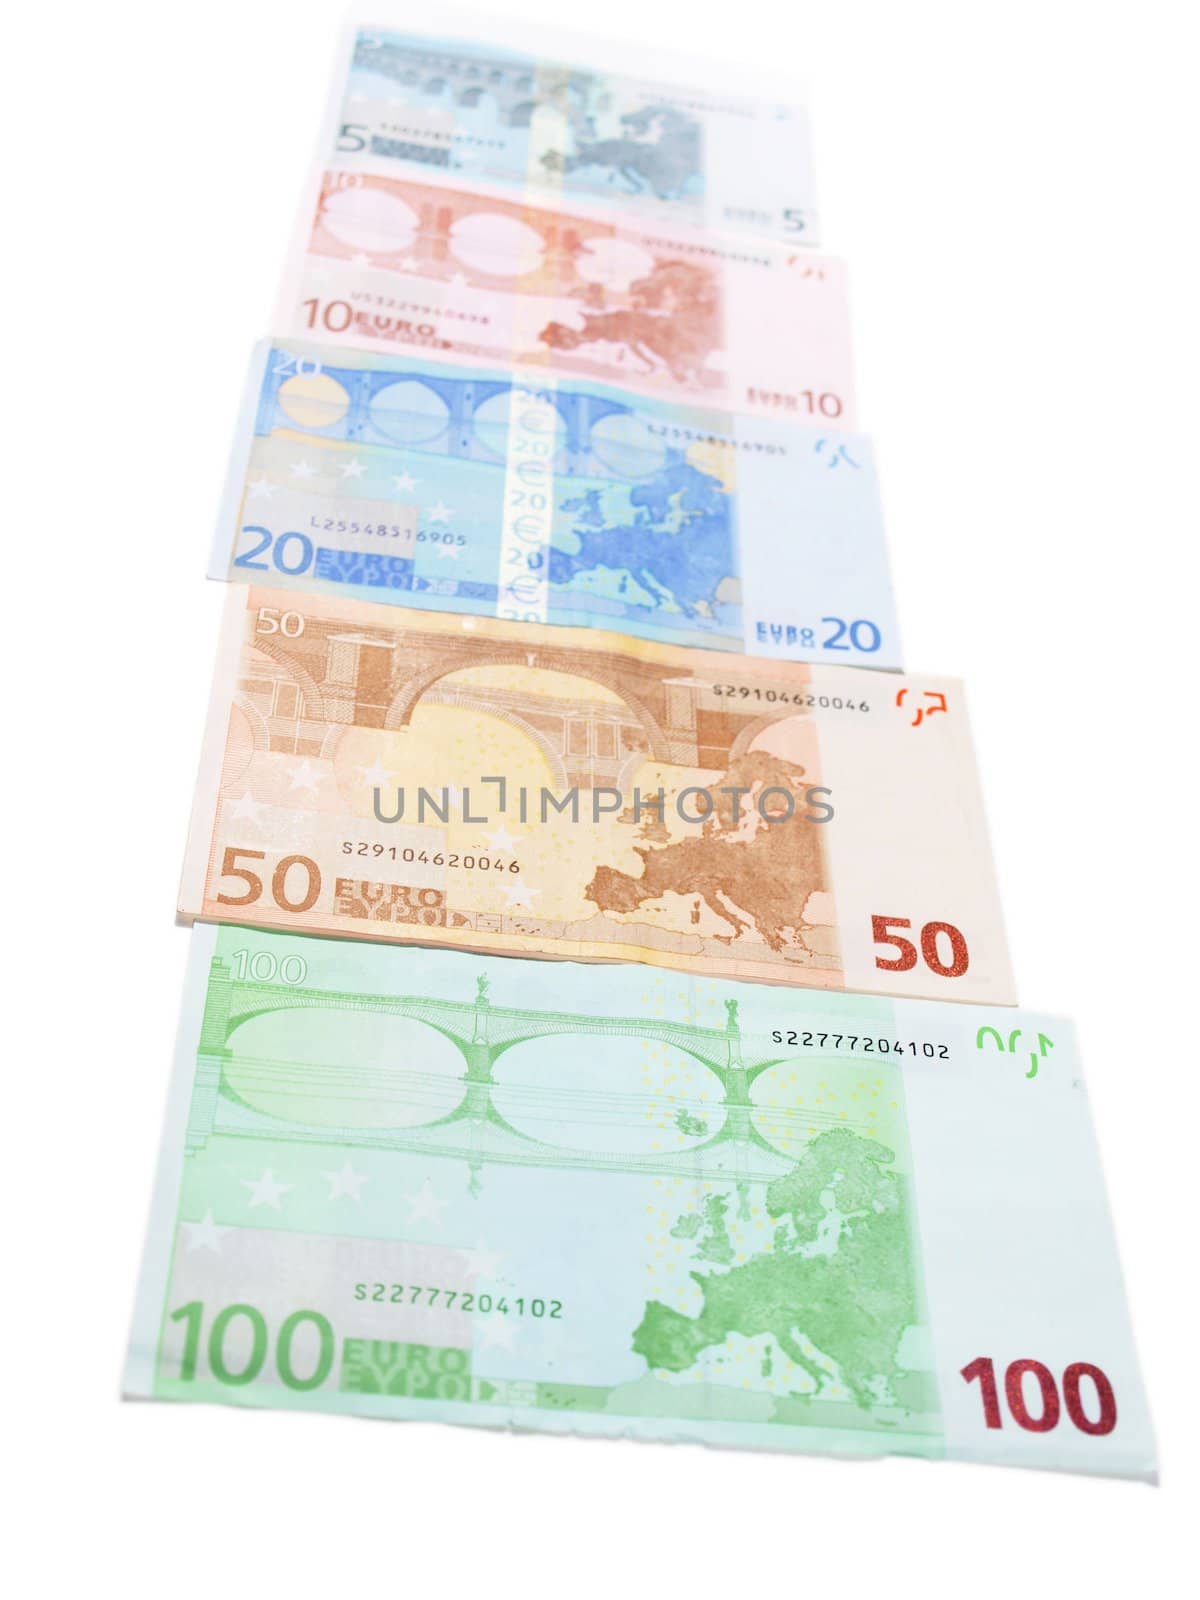 Euro currency bank notes, isolated towards white background by Arvebettum